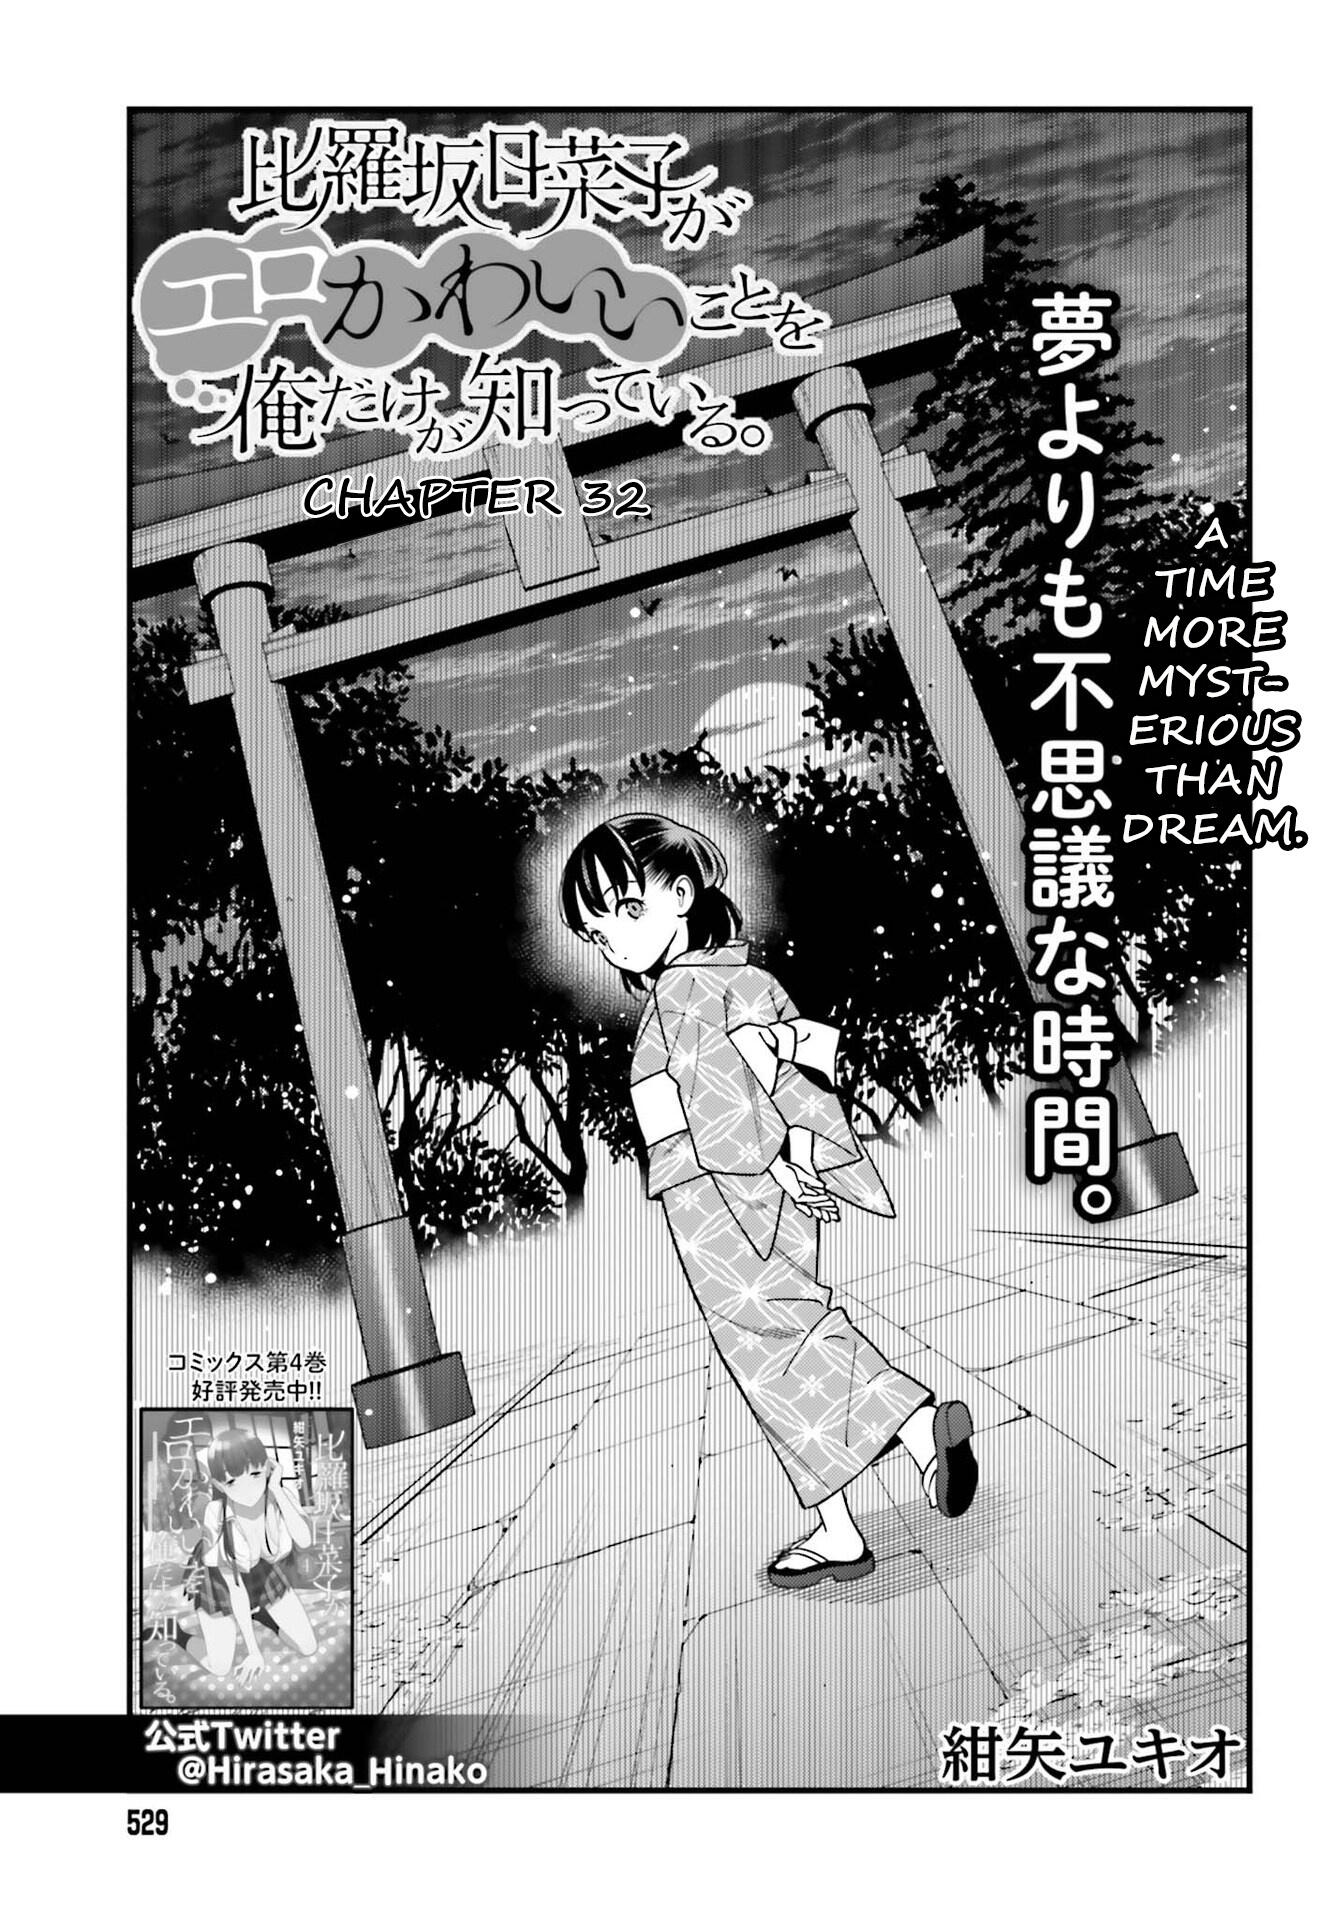 Demon Slayer, Chapter 32 - English Scans